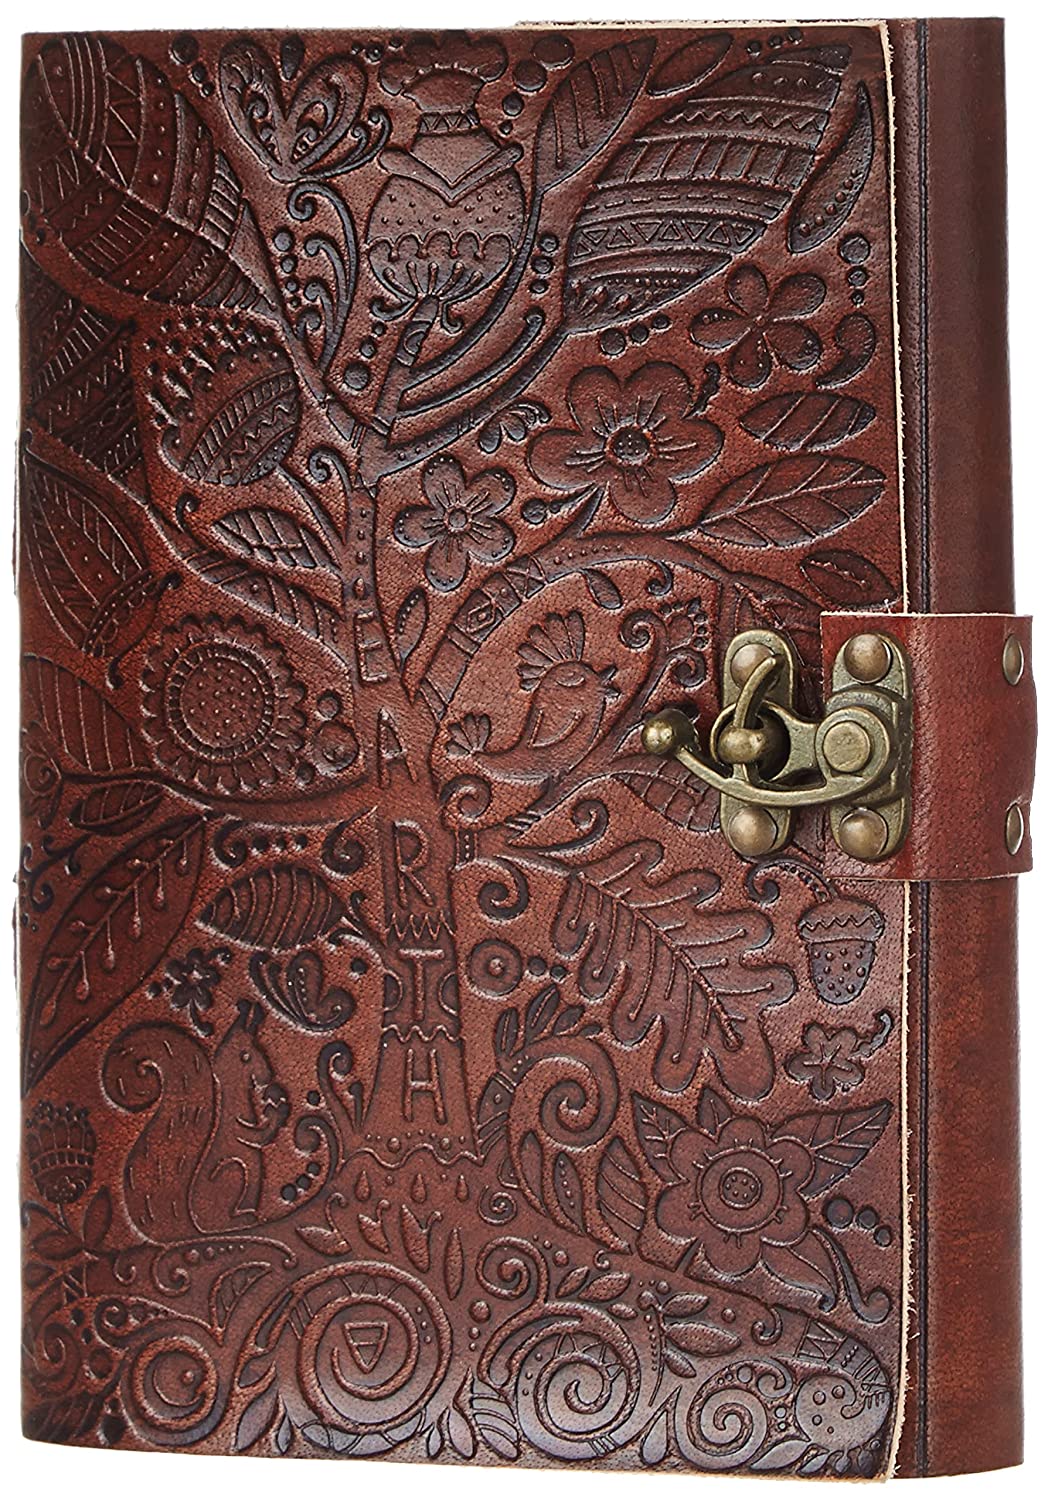 Handcrafted Leather Journal Embossed with a Tree Design with Vintage Lock